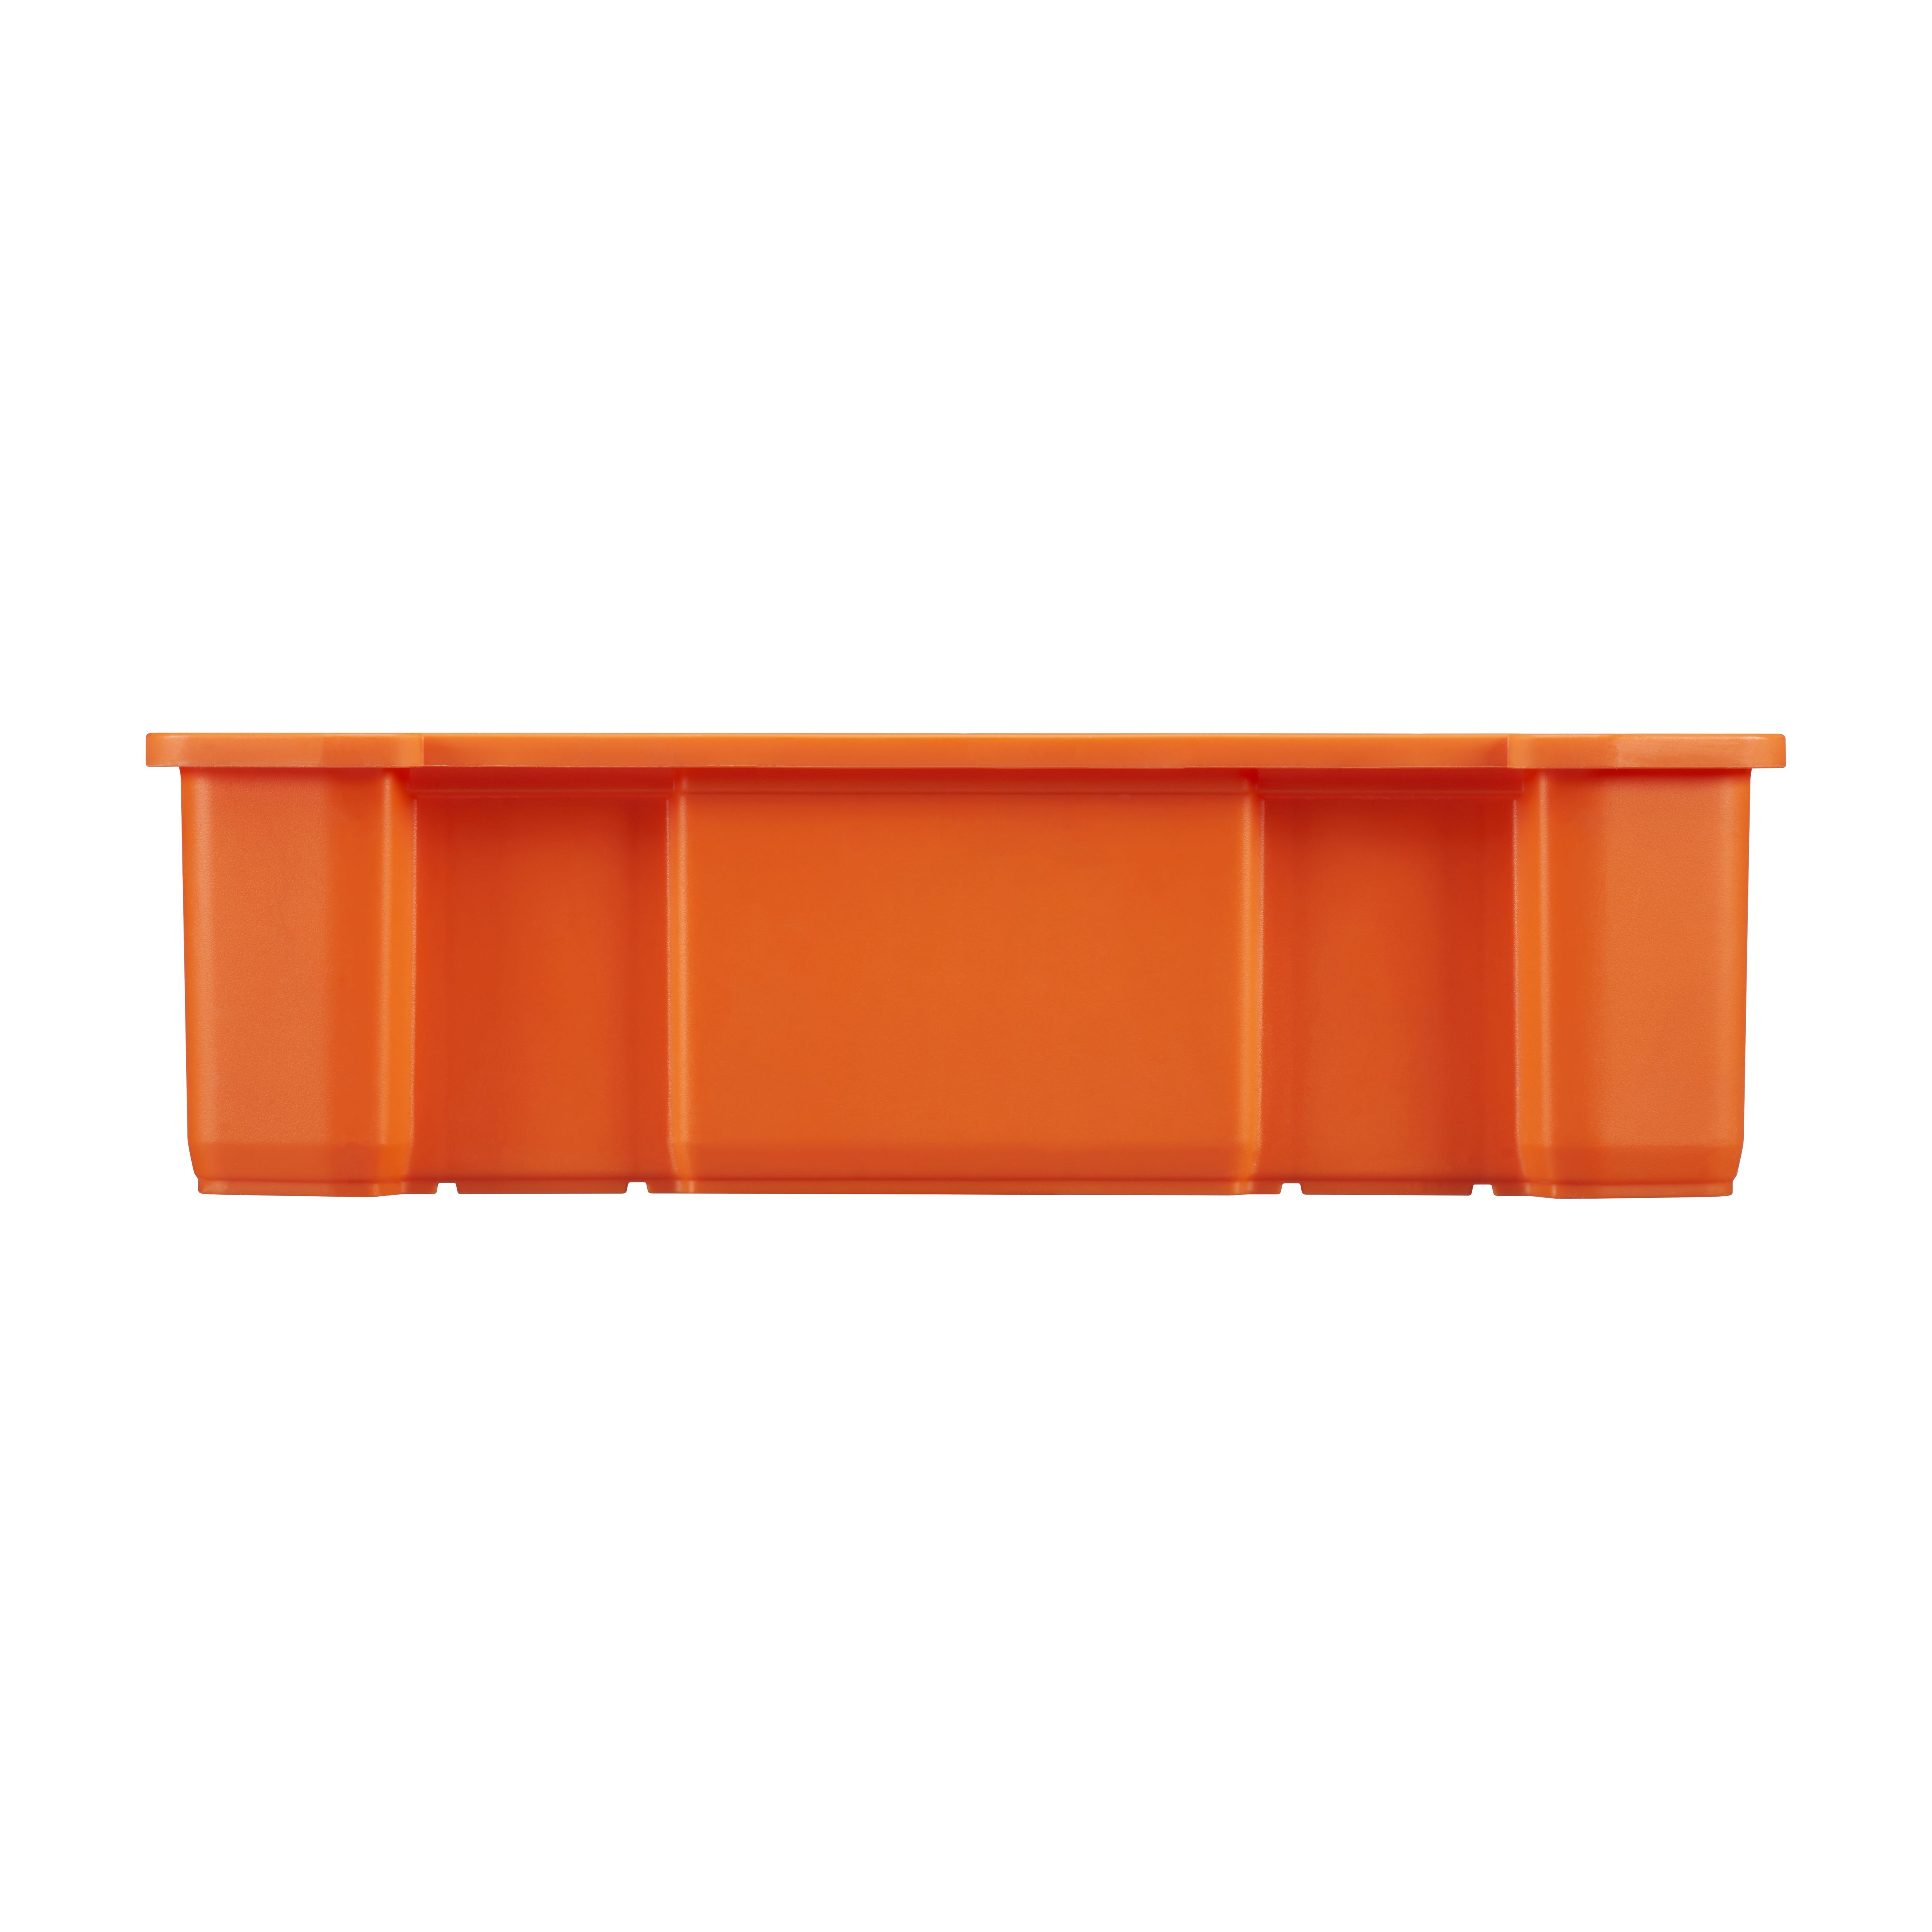 Polypropylene 2 compartment Tote tray caddy (L)492mm (H)336mm